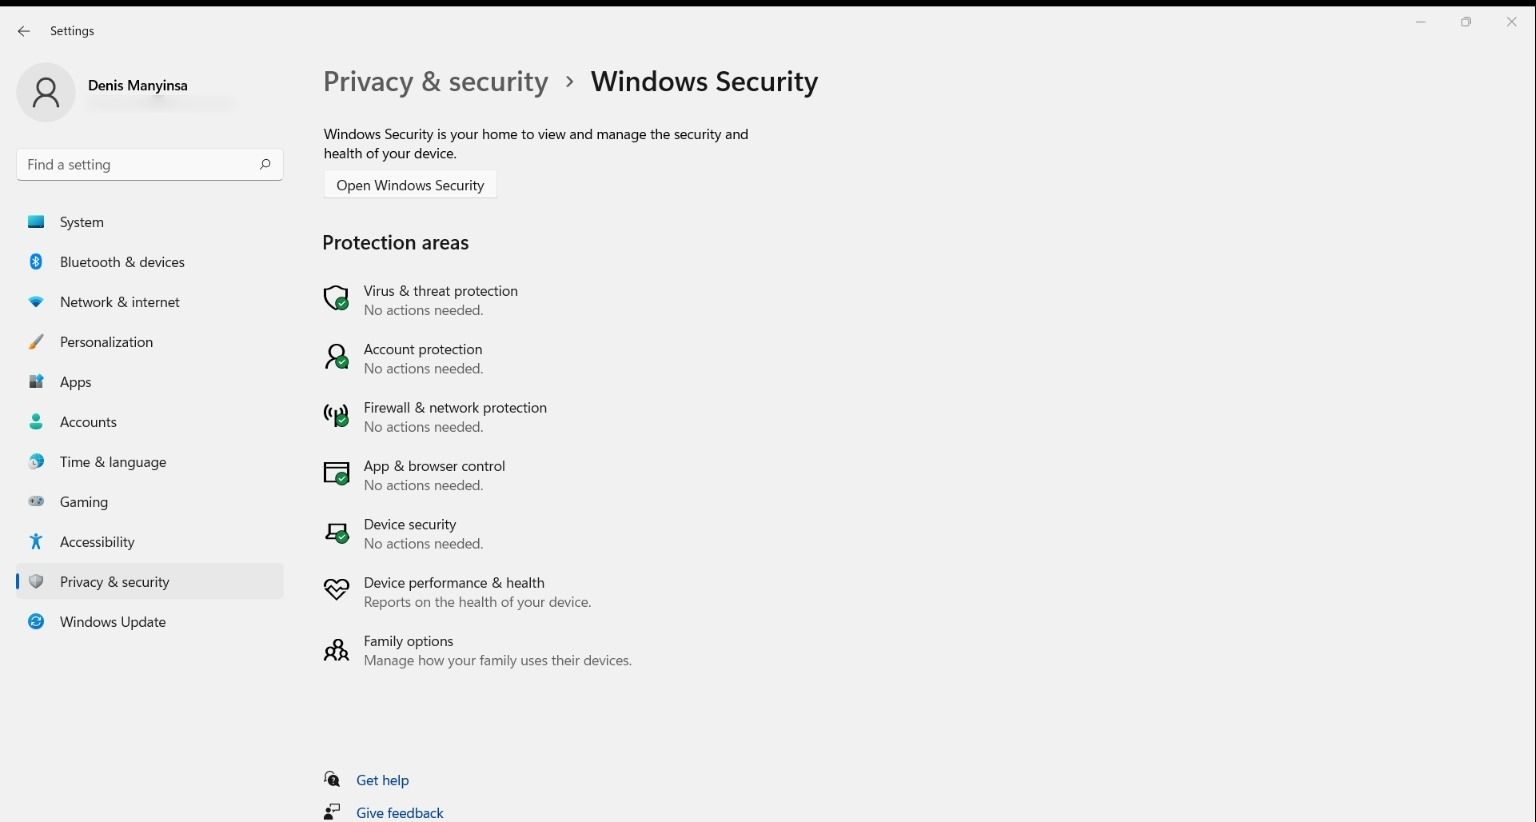 Windows Security's Protection areas